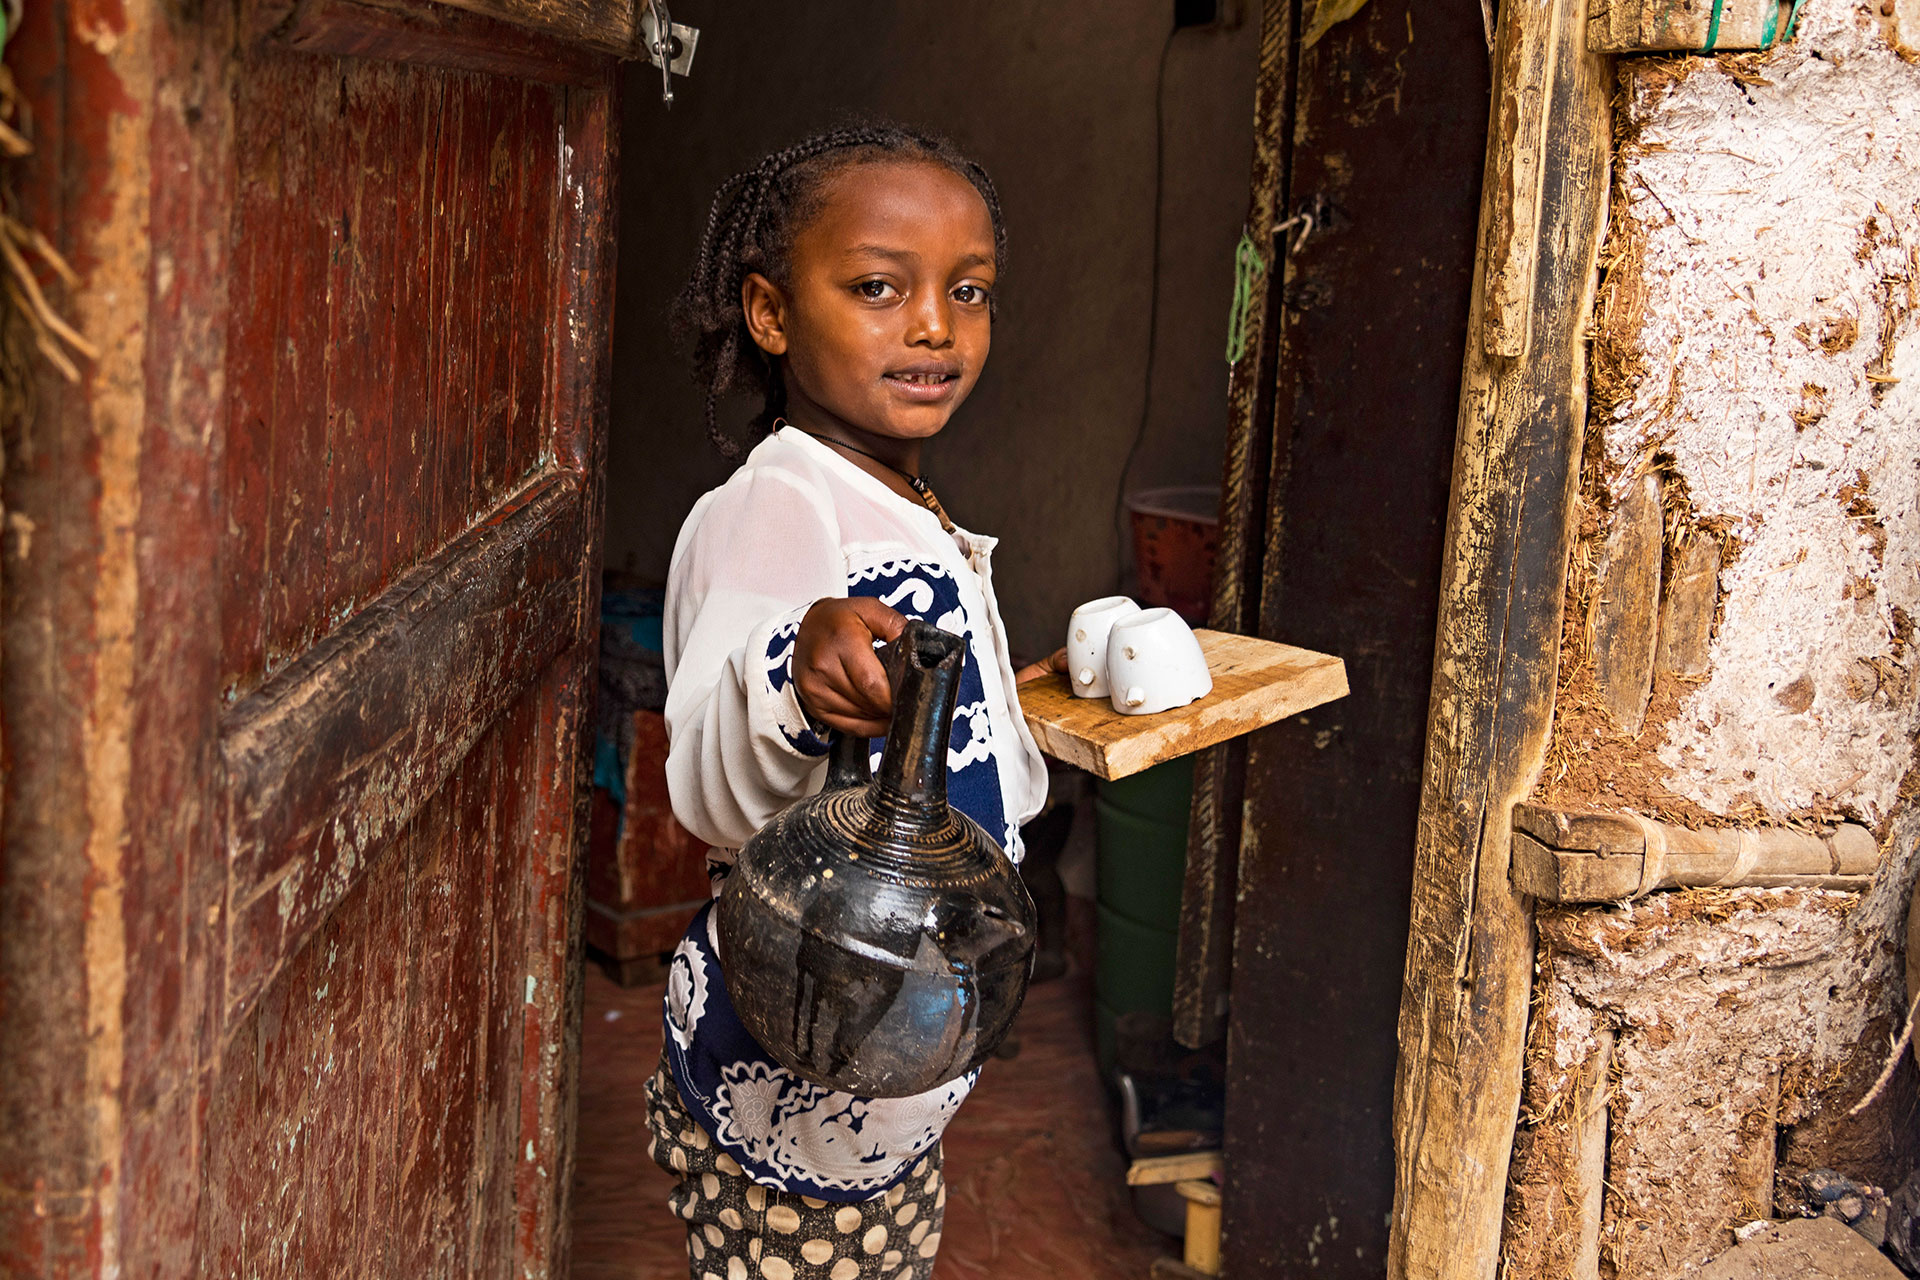 7-year-old Afomiya at her home in Ethiopia